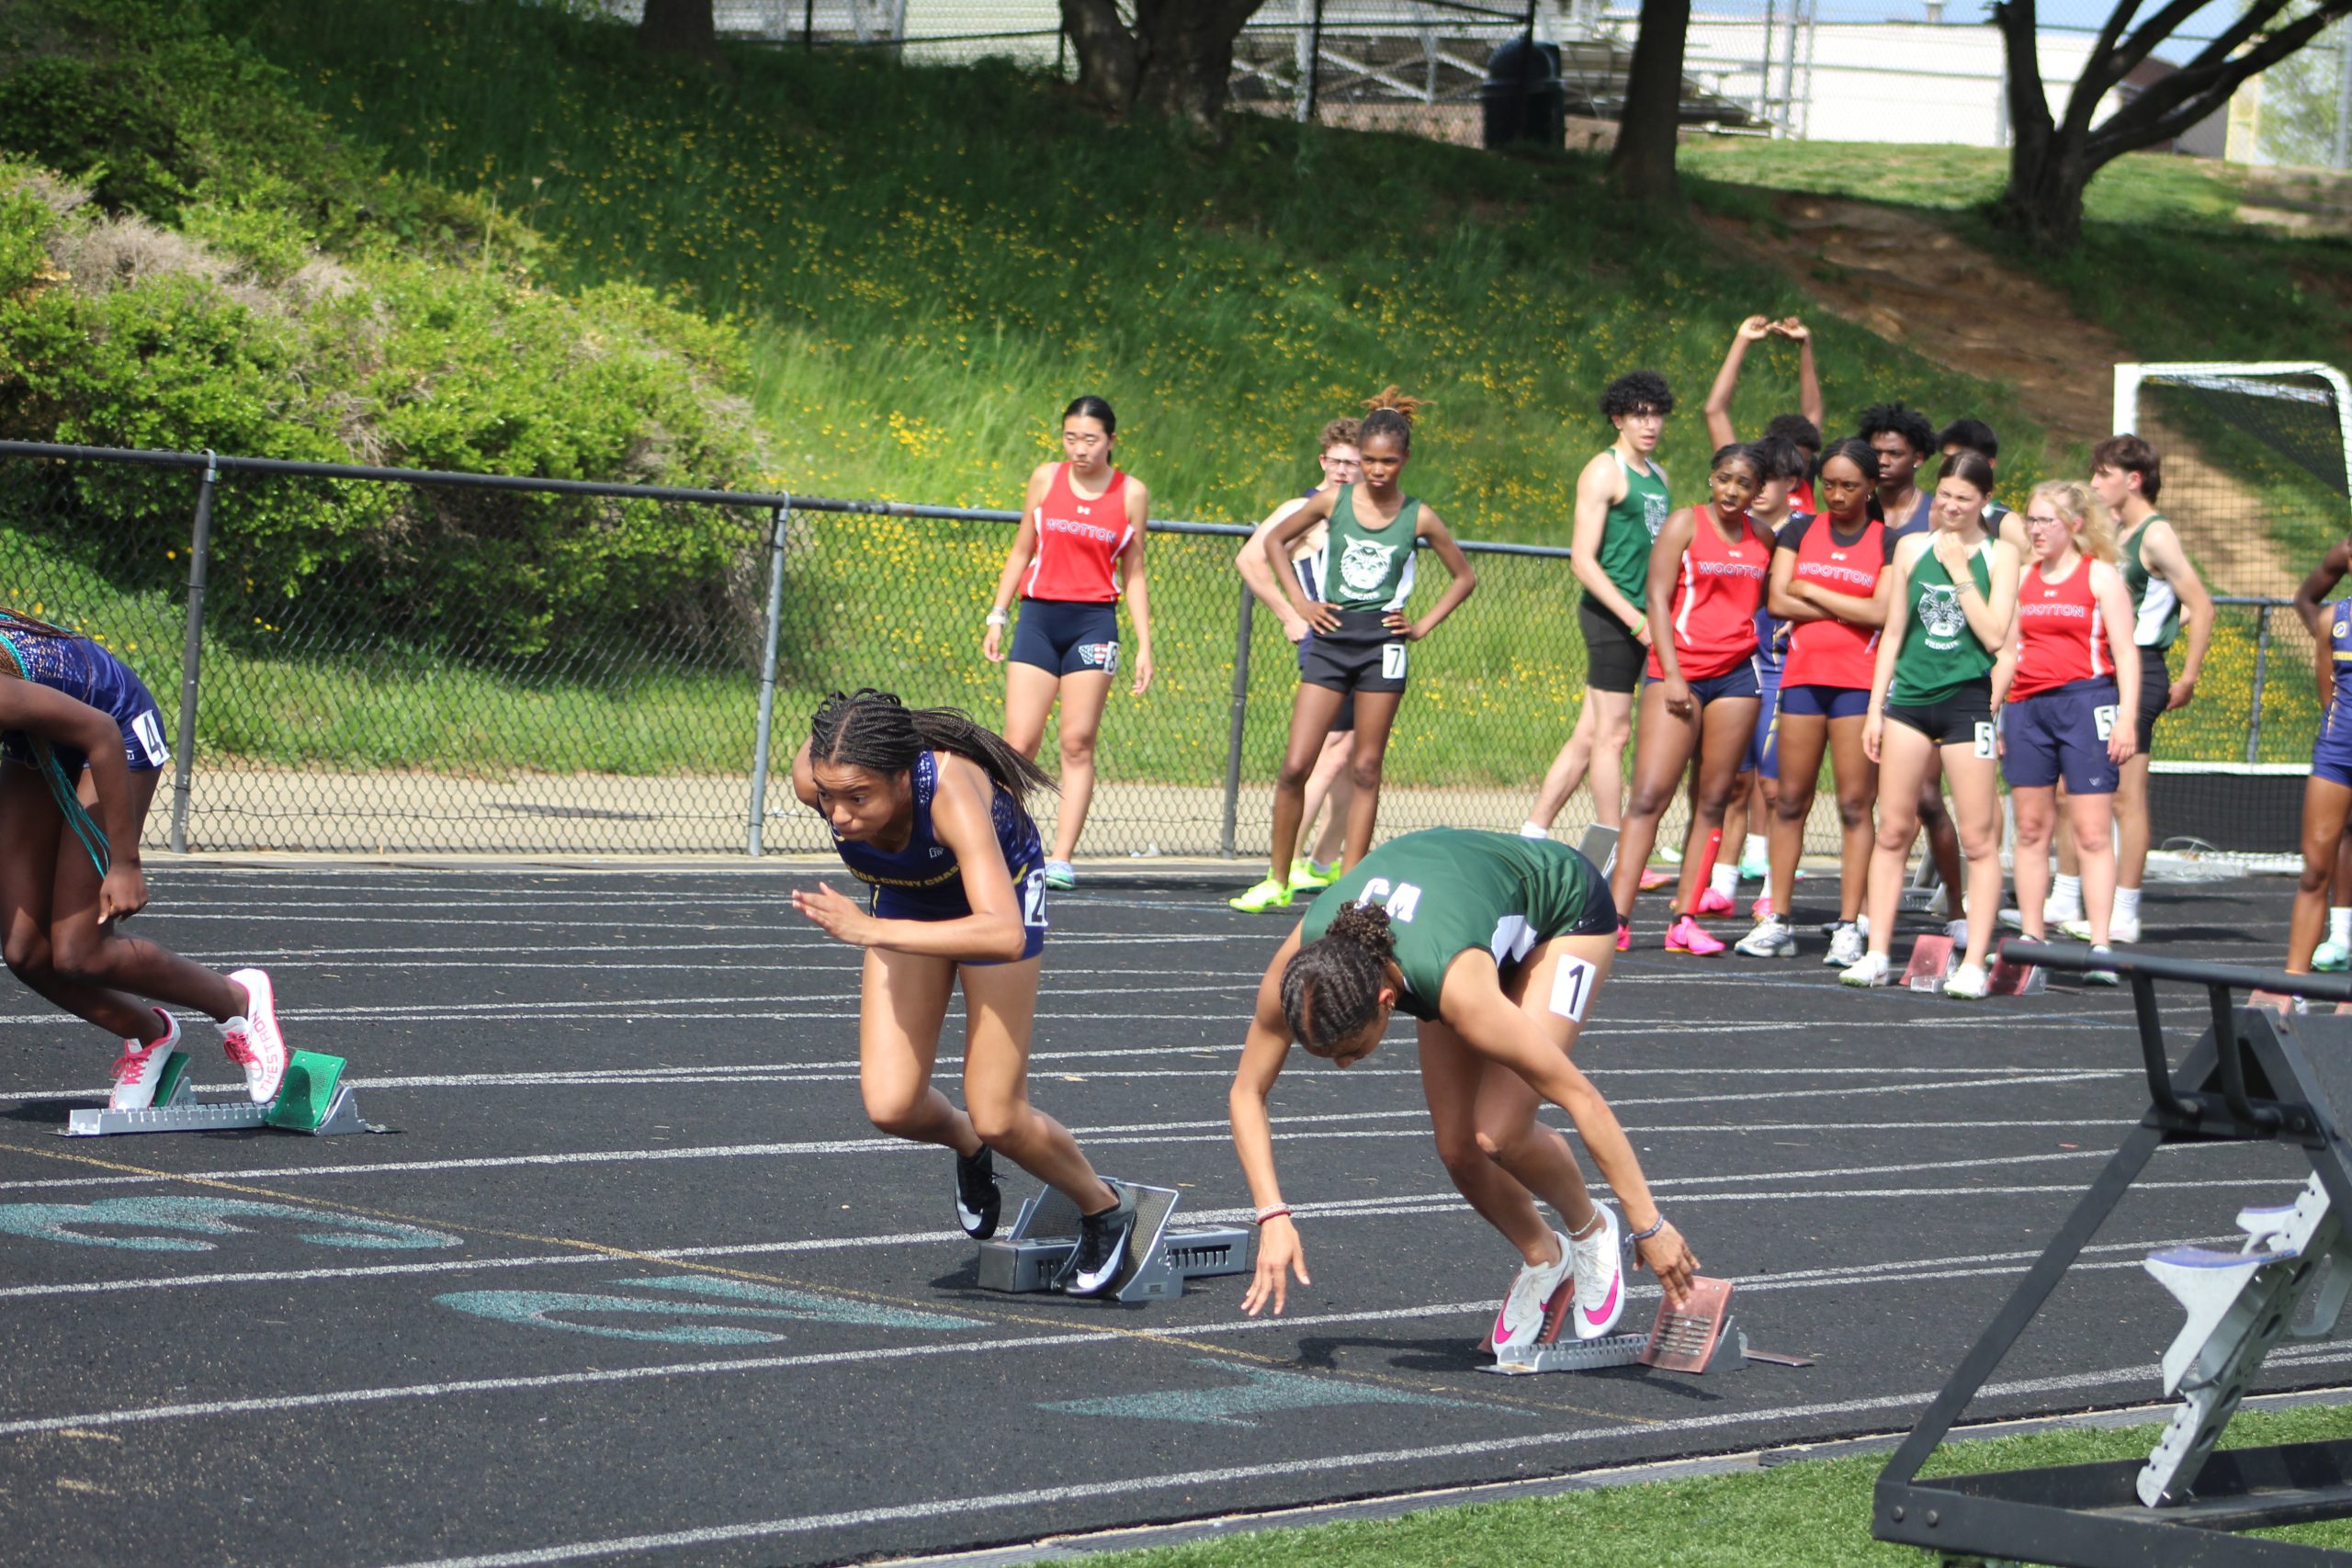 Track+and+field+celebrates+their+seniors%2C+wins+division